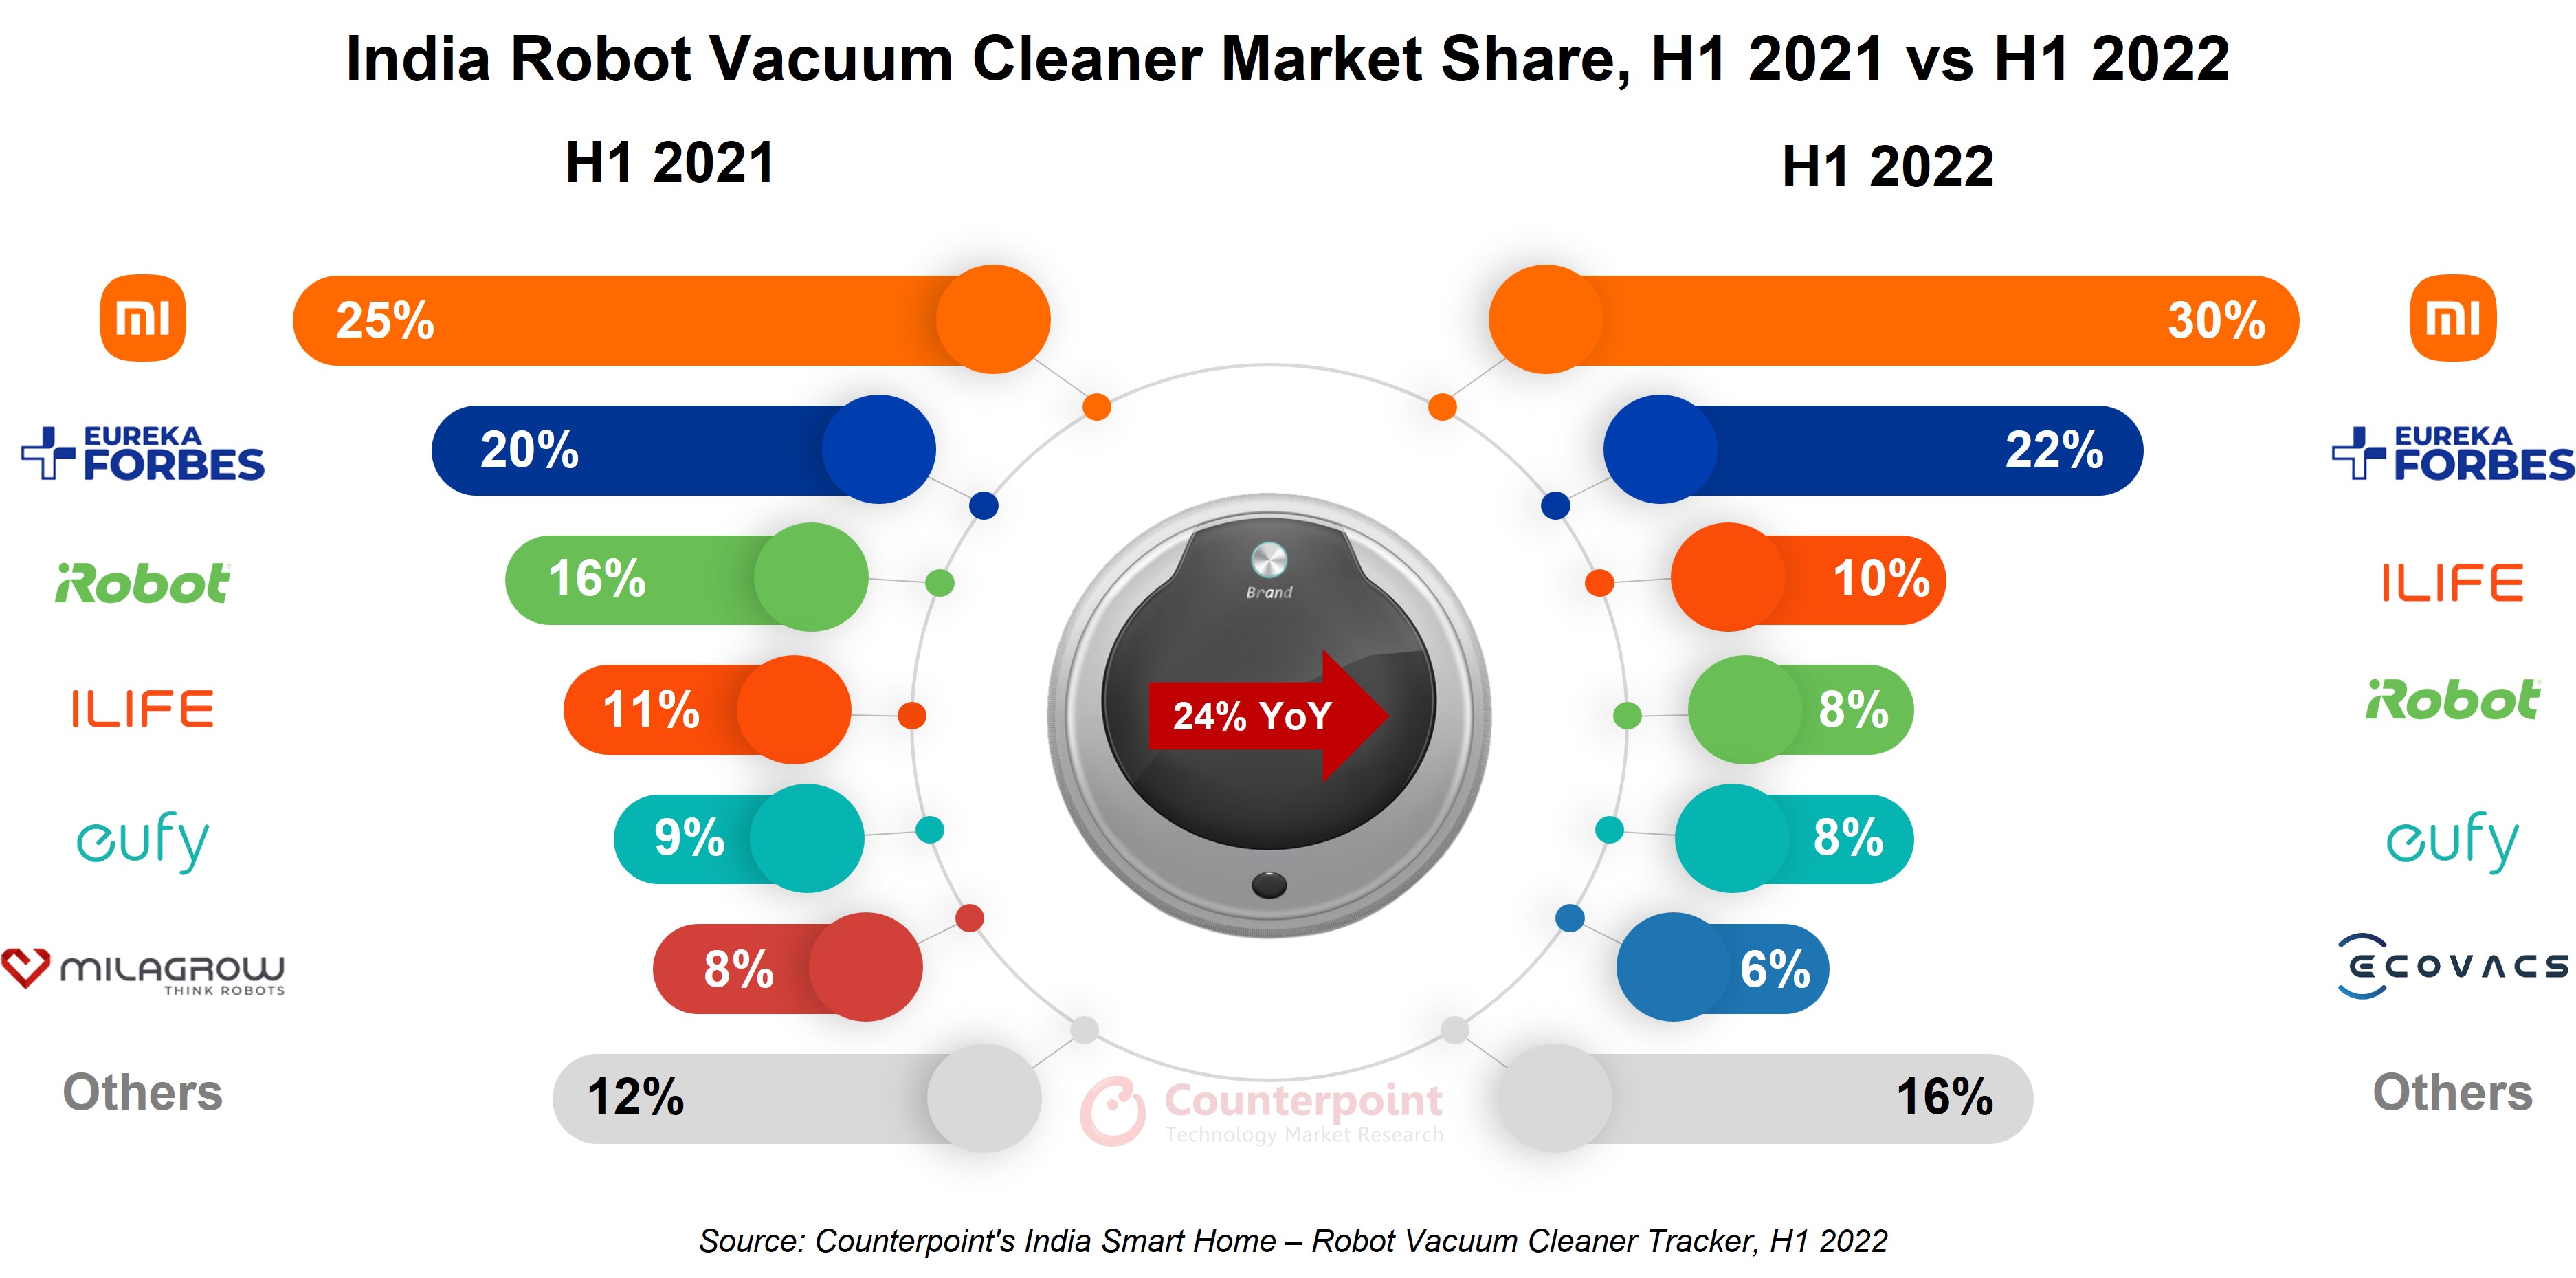 India Robot Vacuum Cleaner Market H1 2021 vs H1 2022 - Counterpoint Research